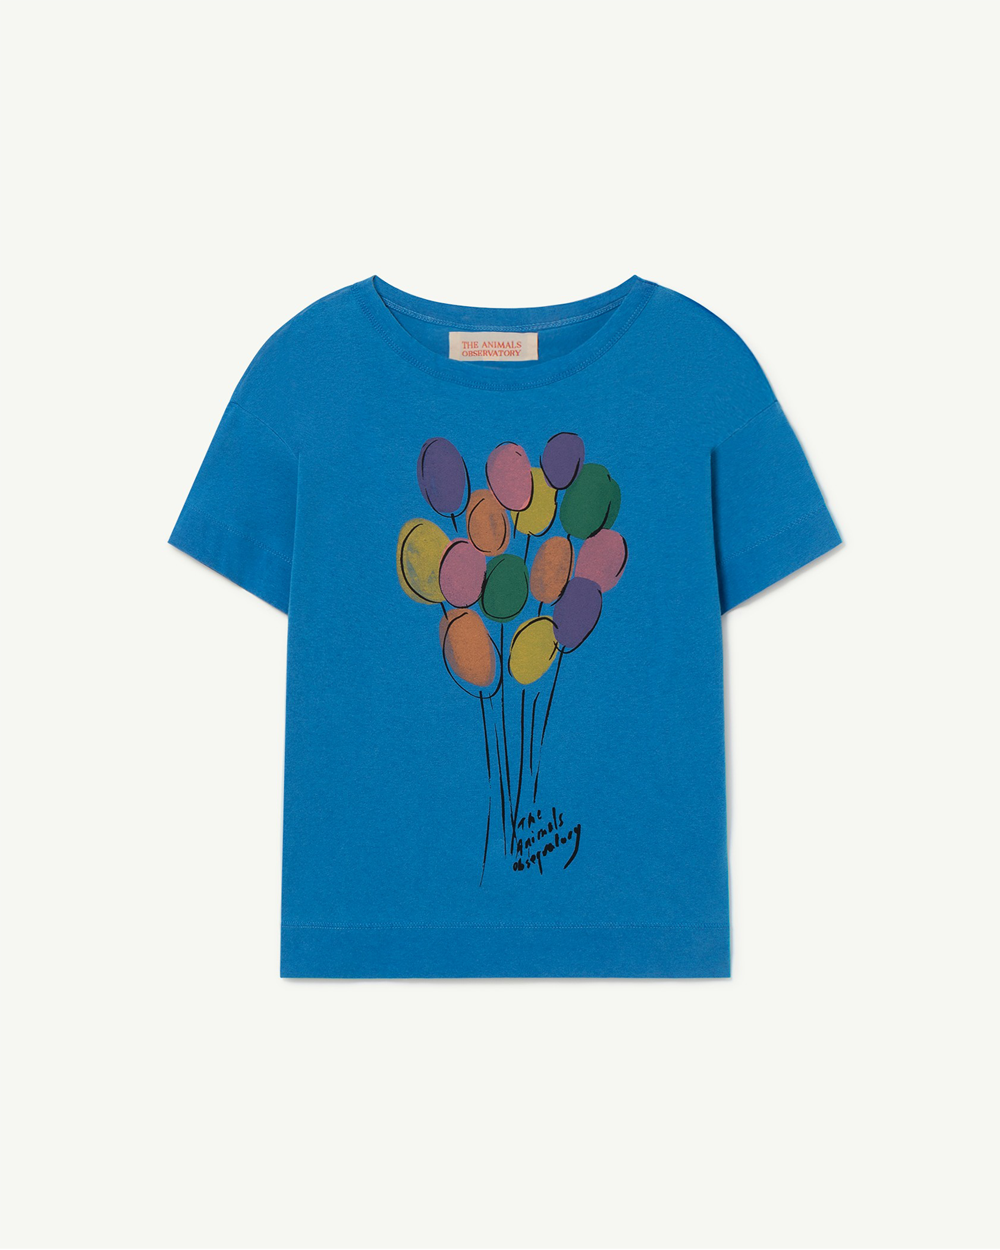 [TAO] F22001-227_EF /ROOSTER KIDS+ T-SHIRT Blue_Balloons